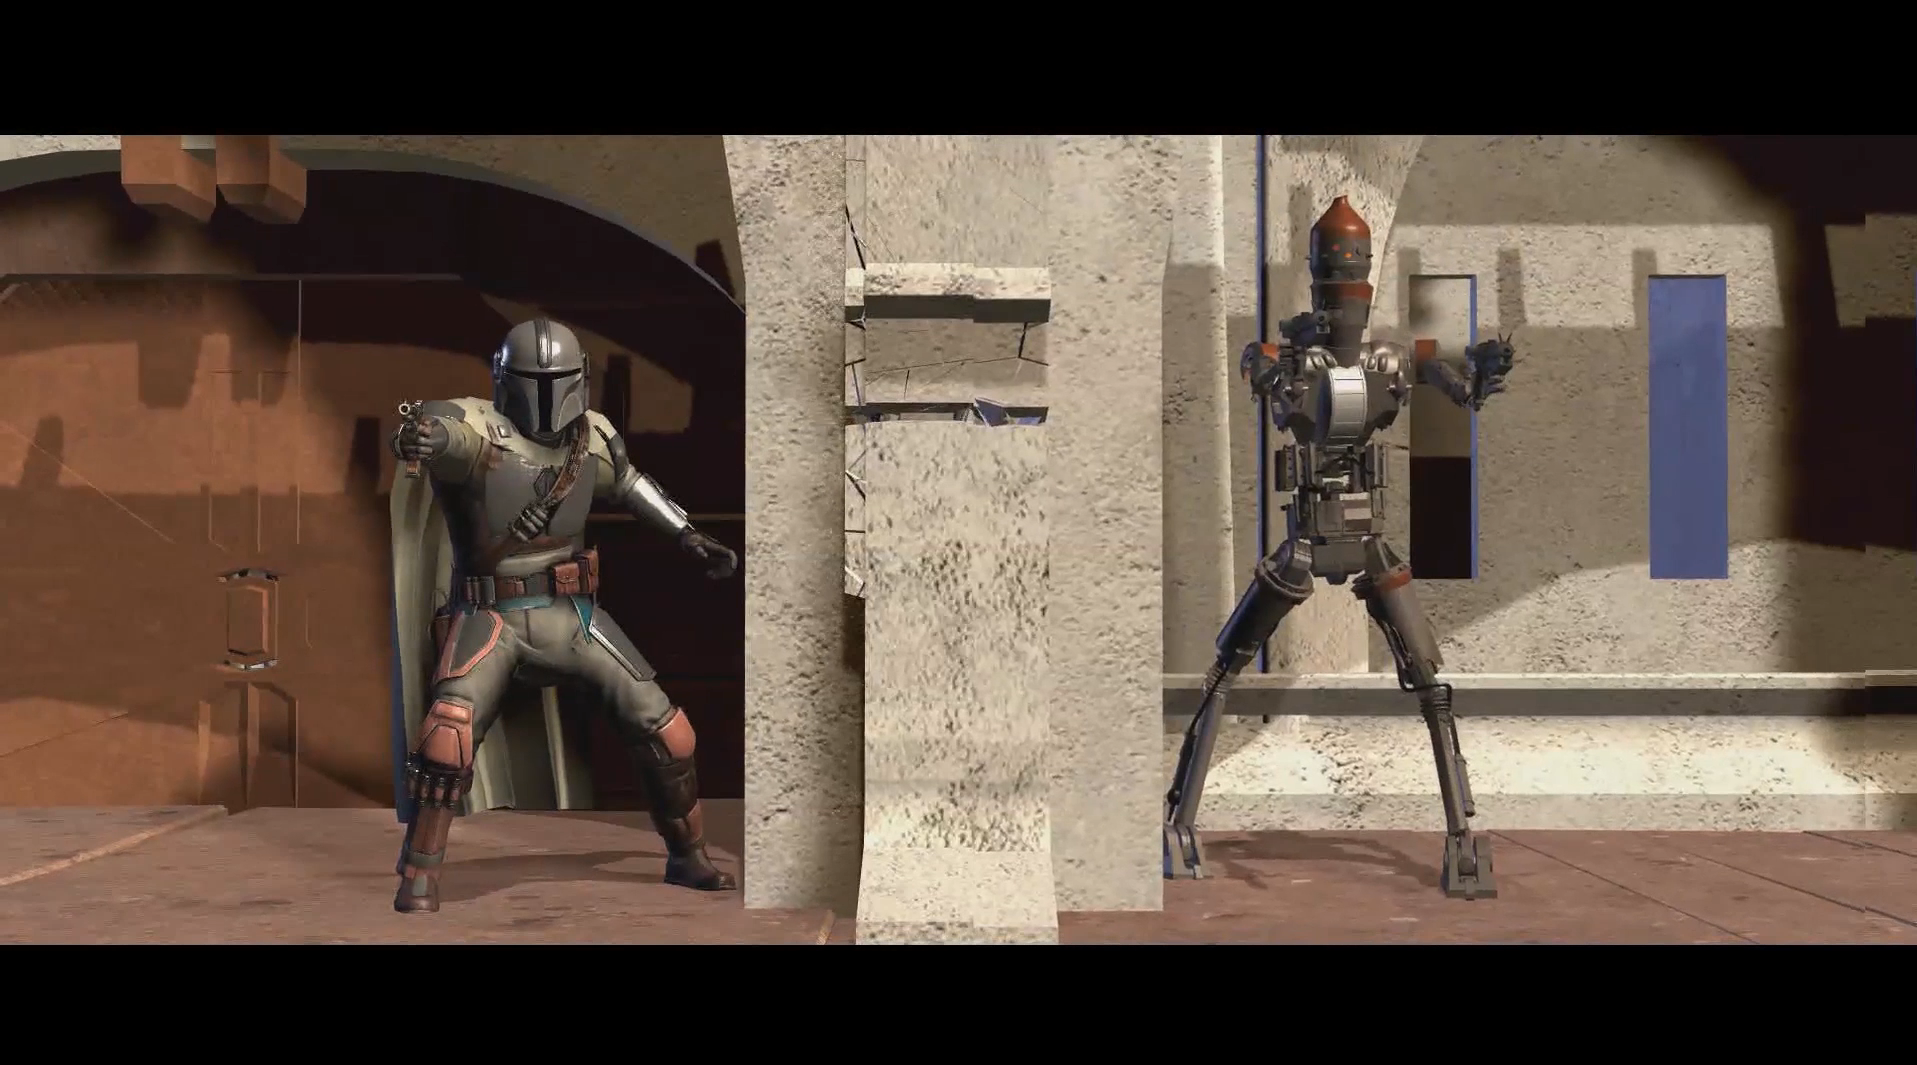 On the out-of-the-way world Arvala-7, a beacon leads the Mandolorian to find an important “asset,” fending off mercenaries with assassin droid IG-11. Virtual blocking imagery, The Third Floor, Inc. © Lucasfilm Ltd. All Rights Reserved.